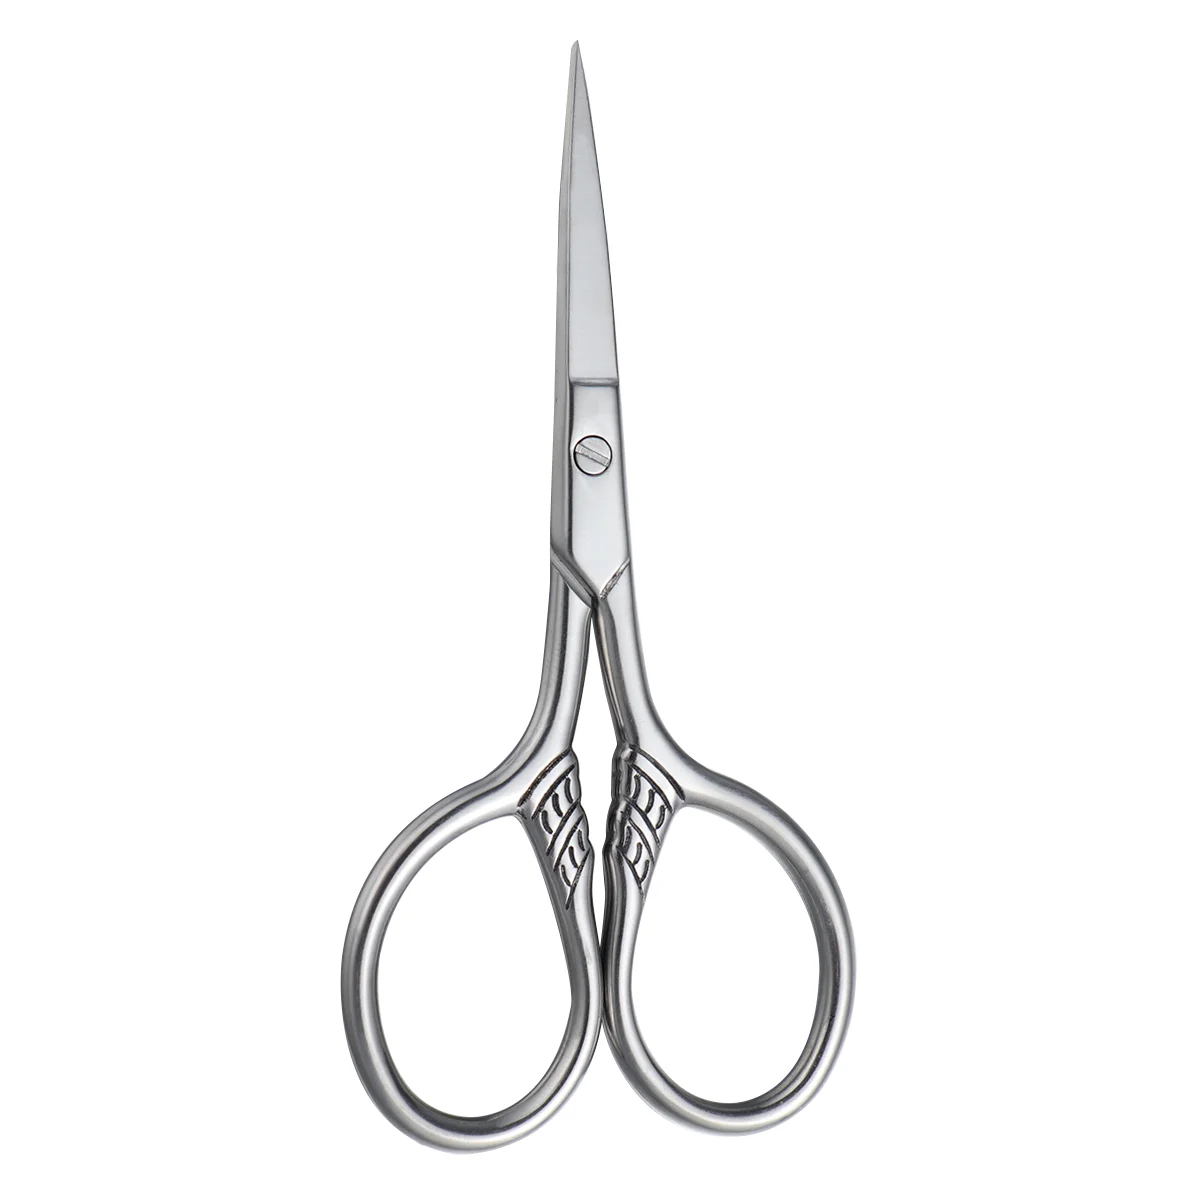 Stainless Steel Nose Hair& Beard Trimming Mustache Trimming Shear Professional Hair Scissor Small Grooming for Men Silver stainless steel scissors for hair professional hairdressing thinning scissor haircut cutting shear barber 6 inch styling tool